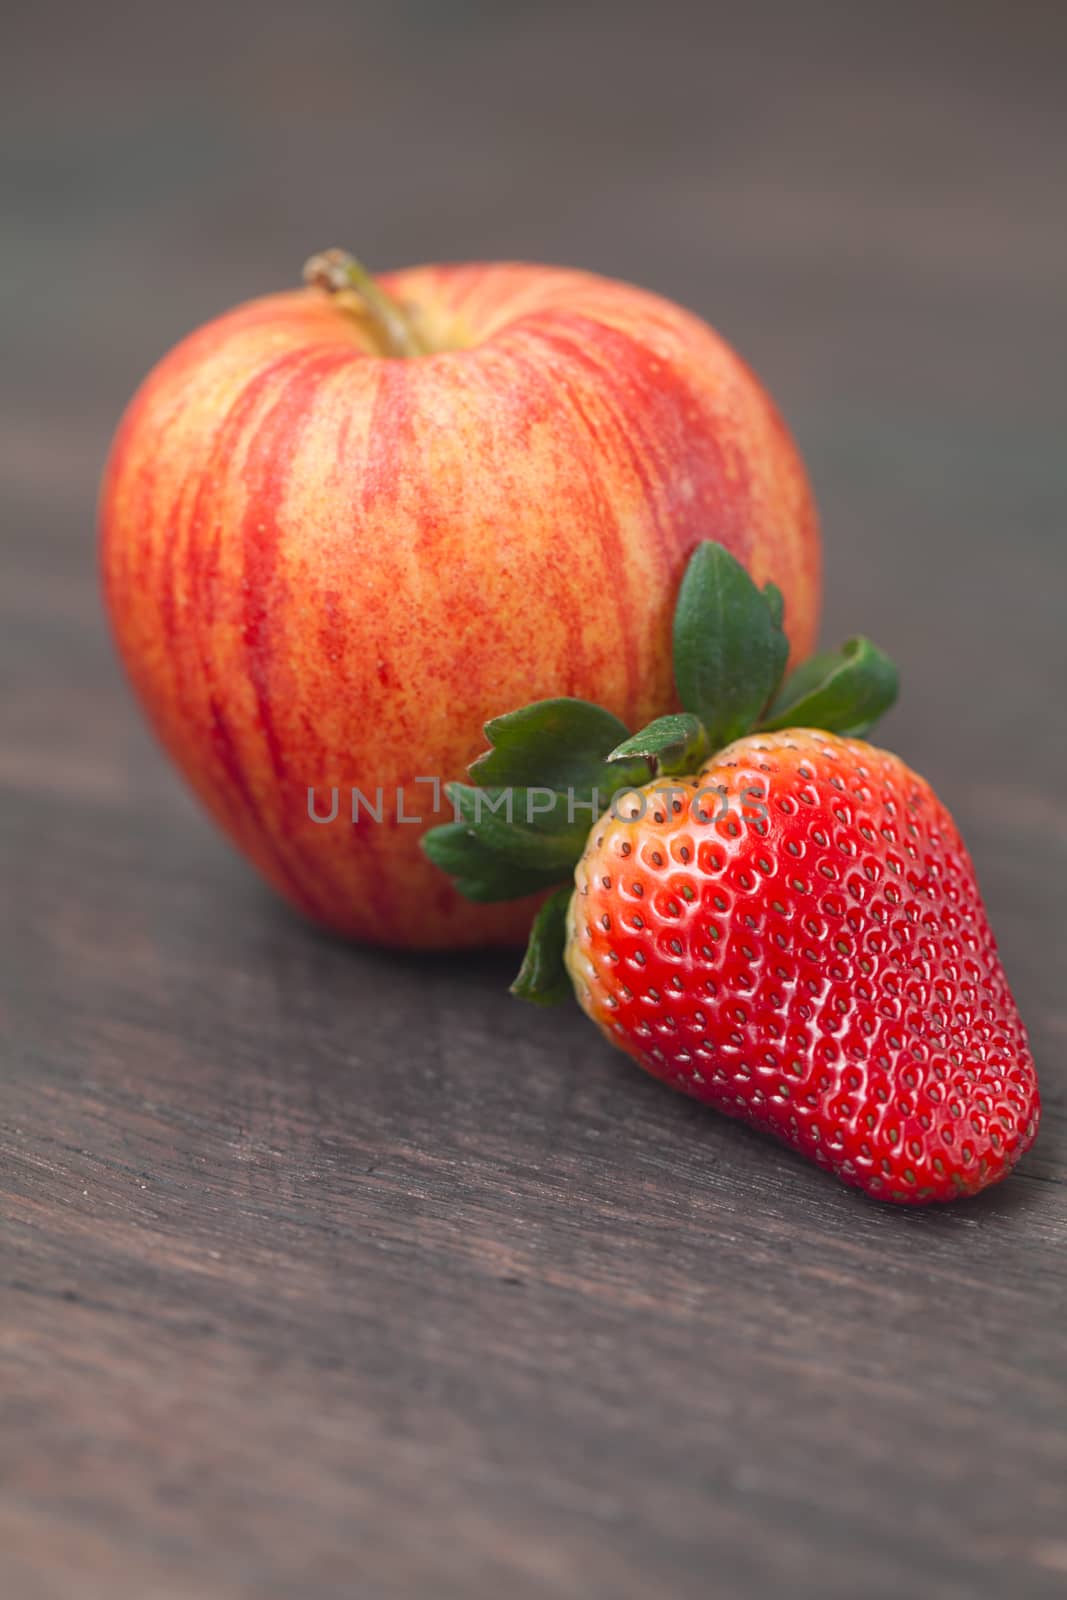  juicy apple and strawberry on a wooden surface